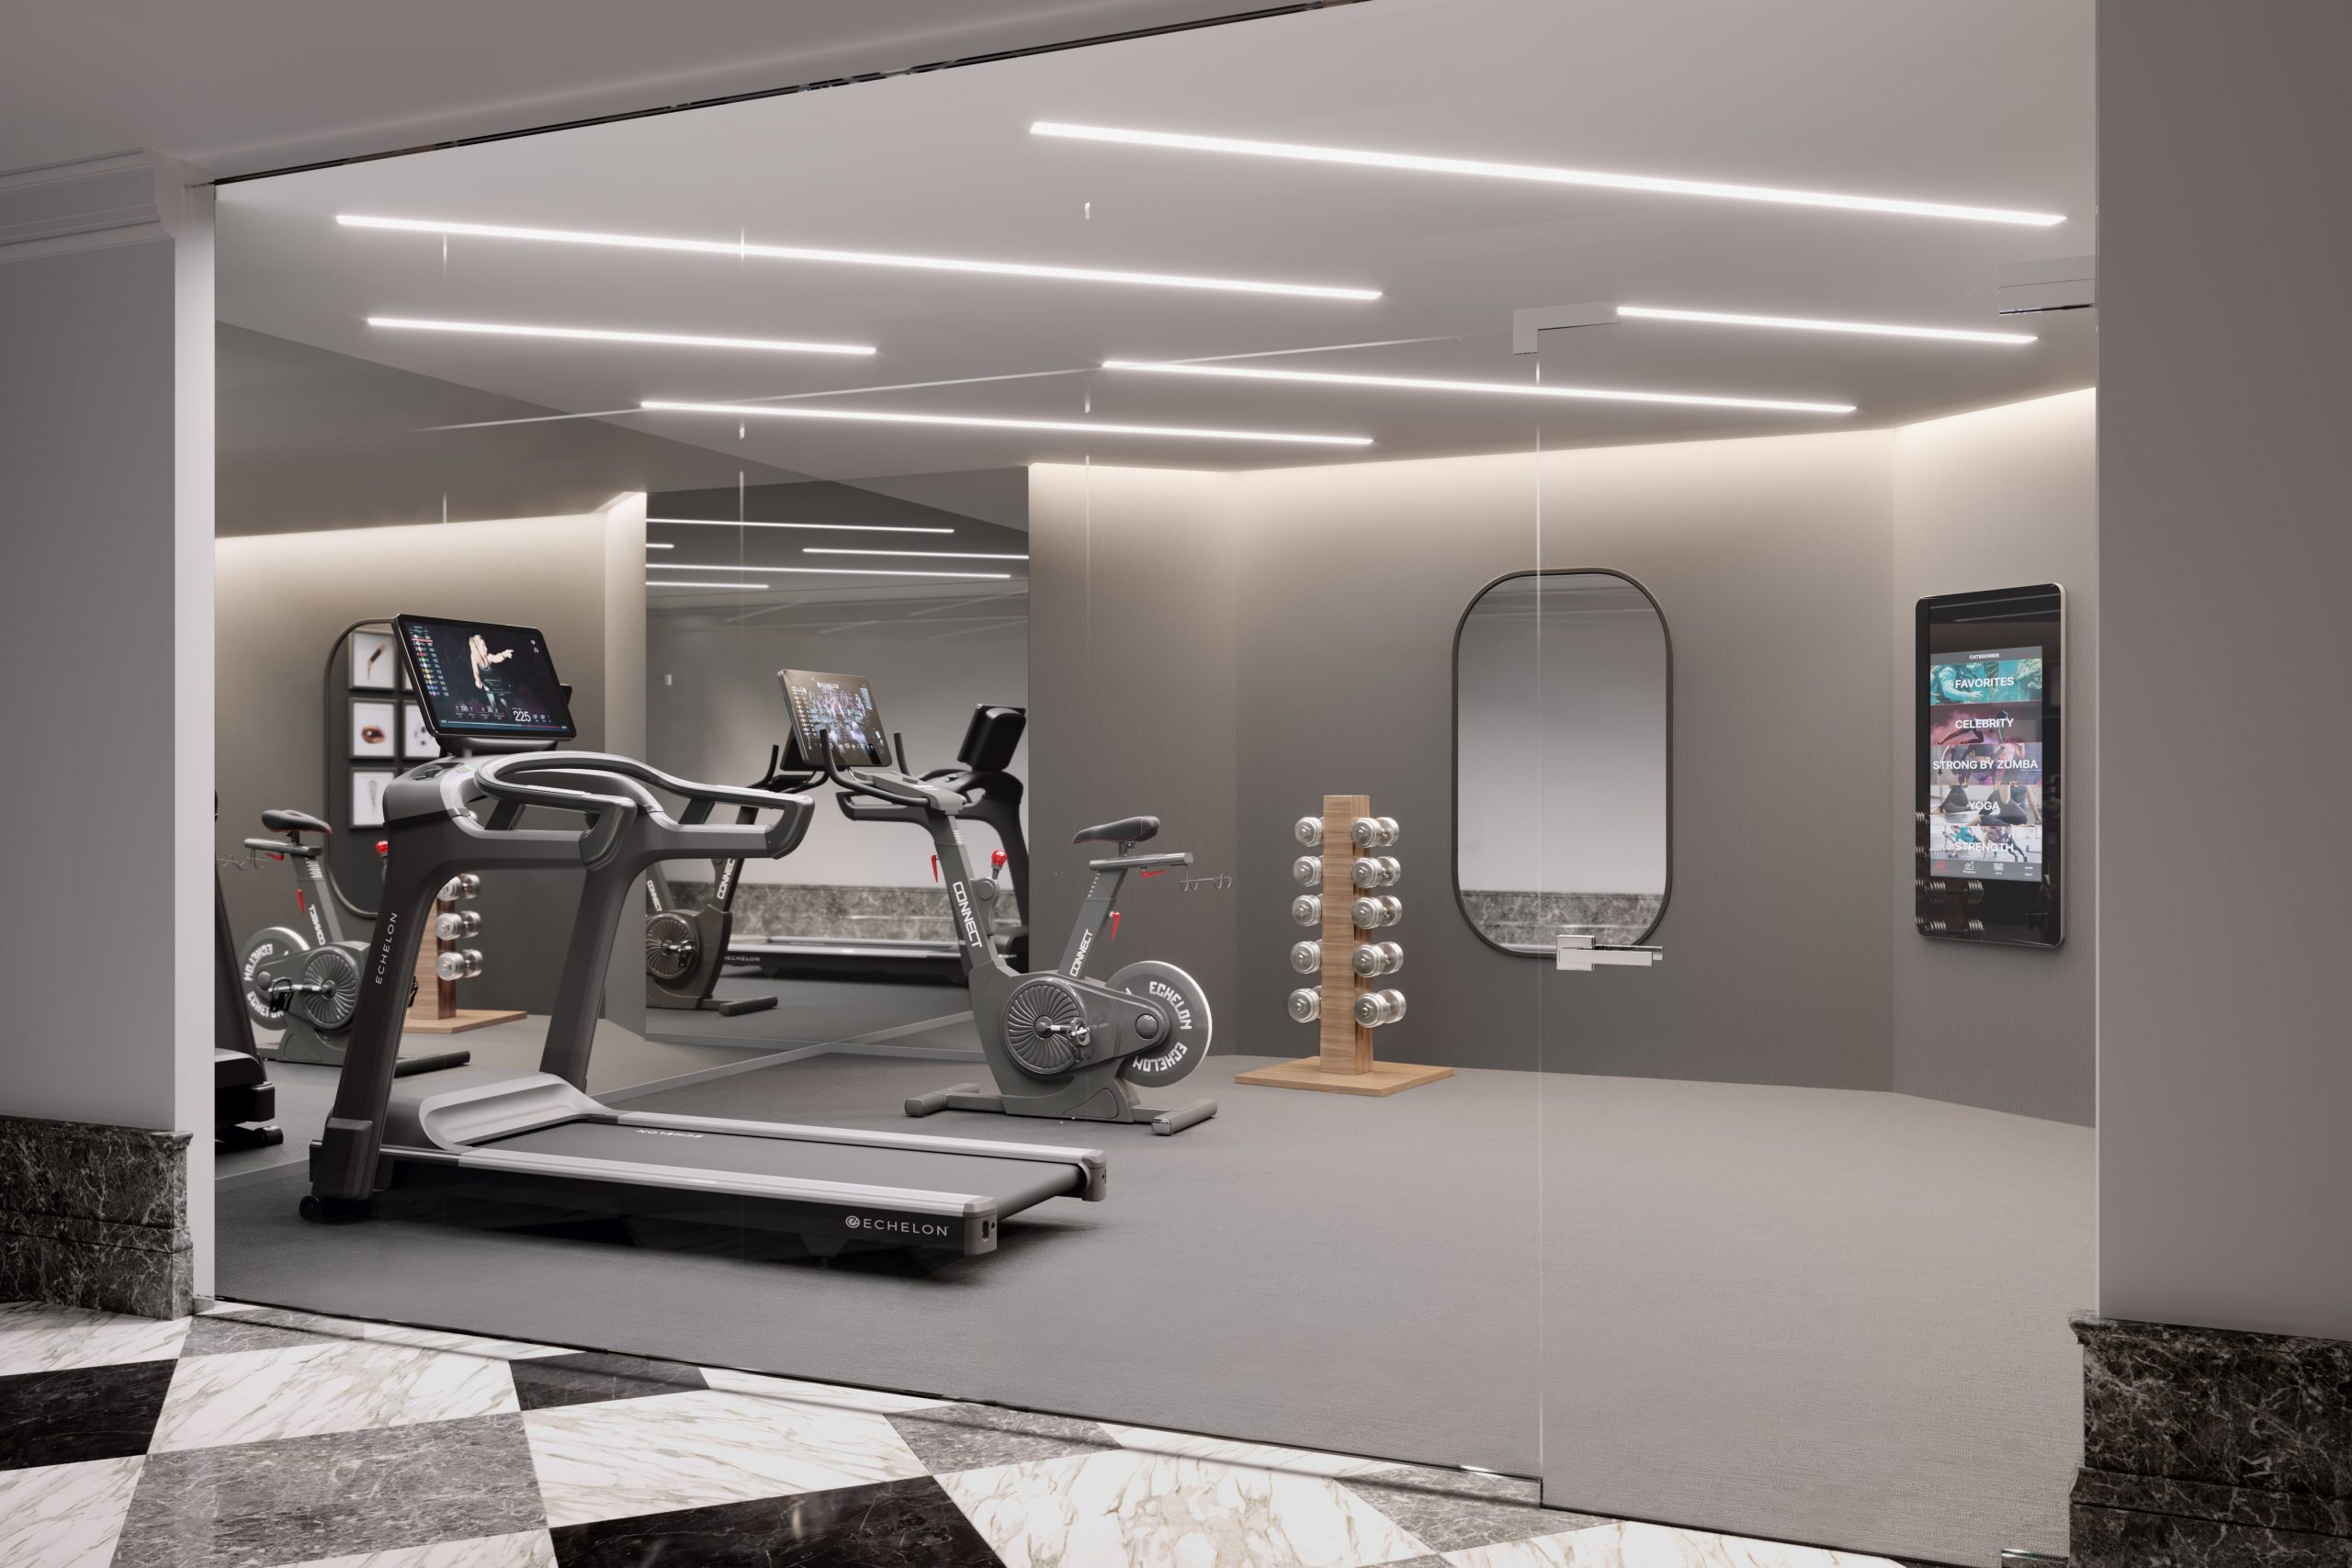 Gym 3D Render for a Percy Condo Building Project